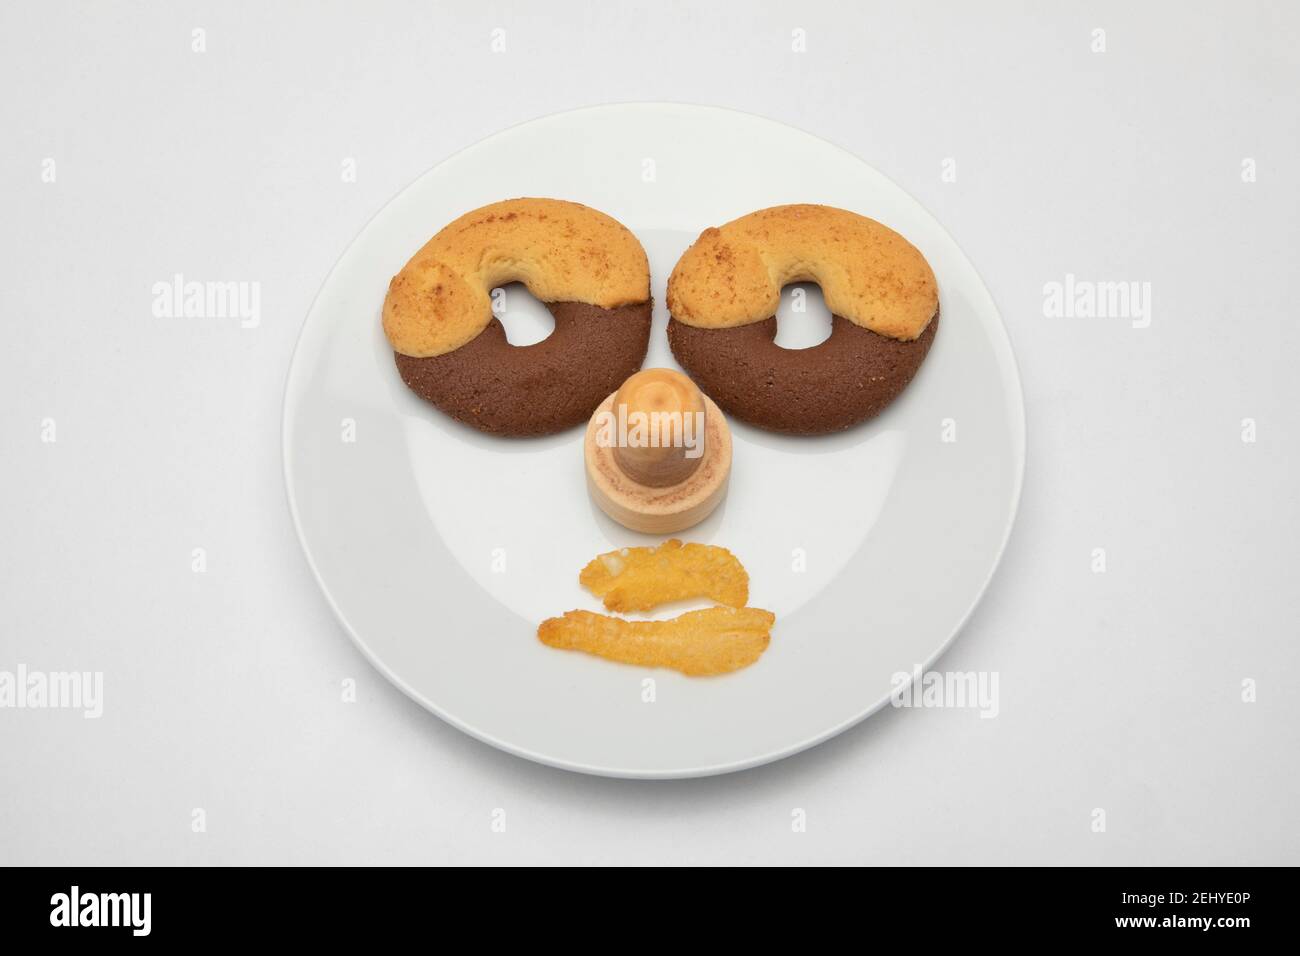 a face made of biscuits on a plate with cornflex mouth Stock Photo